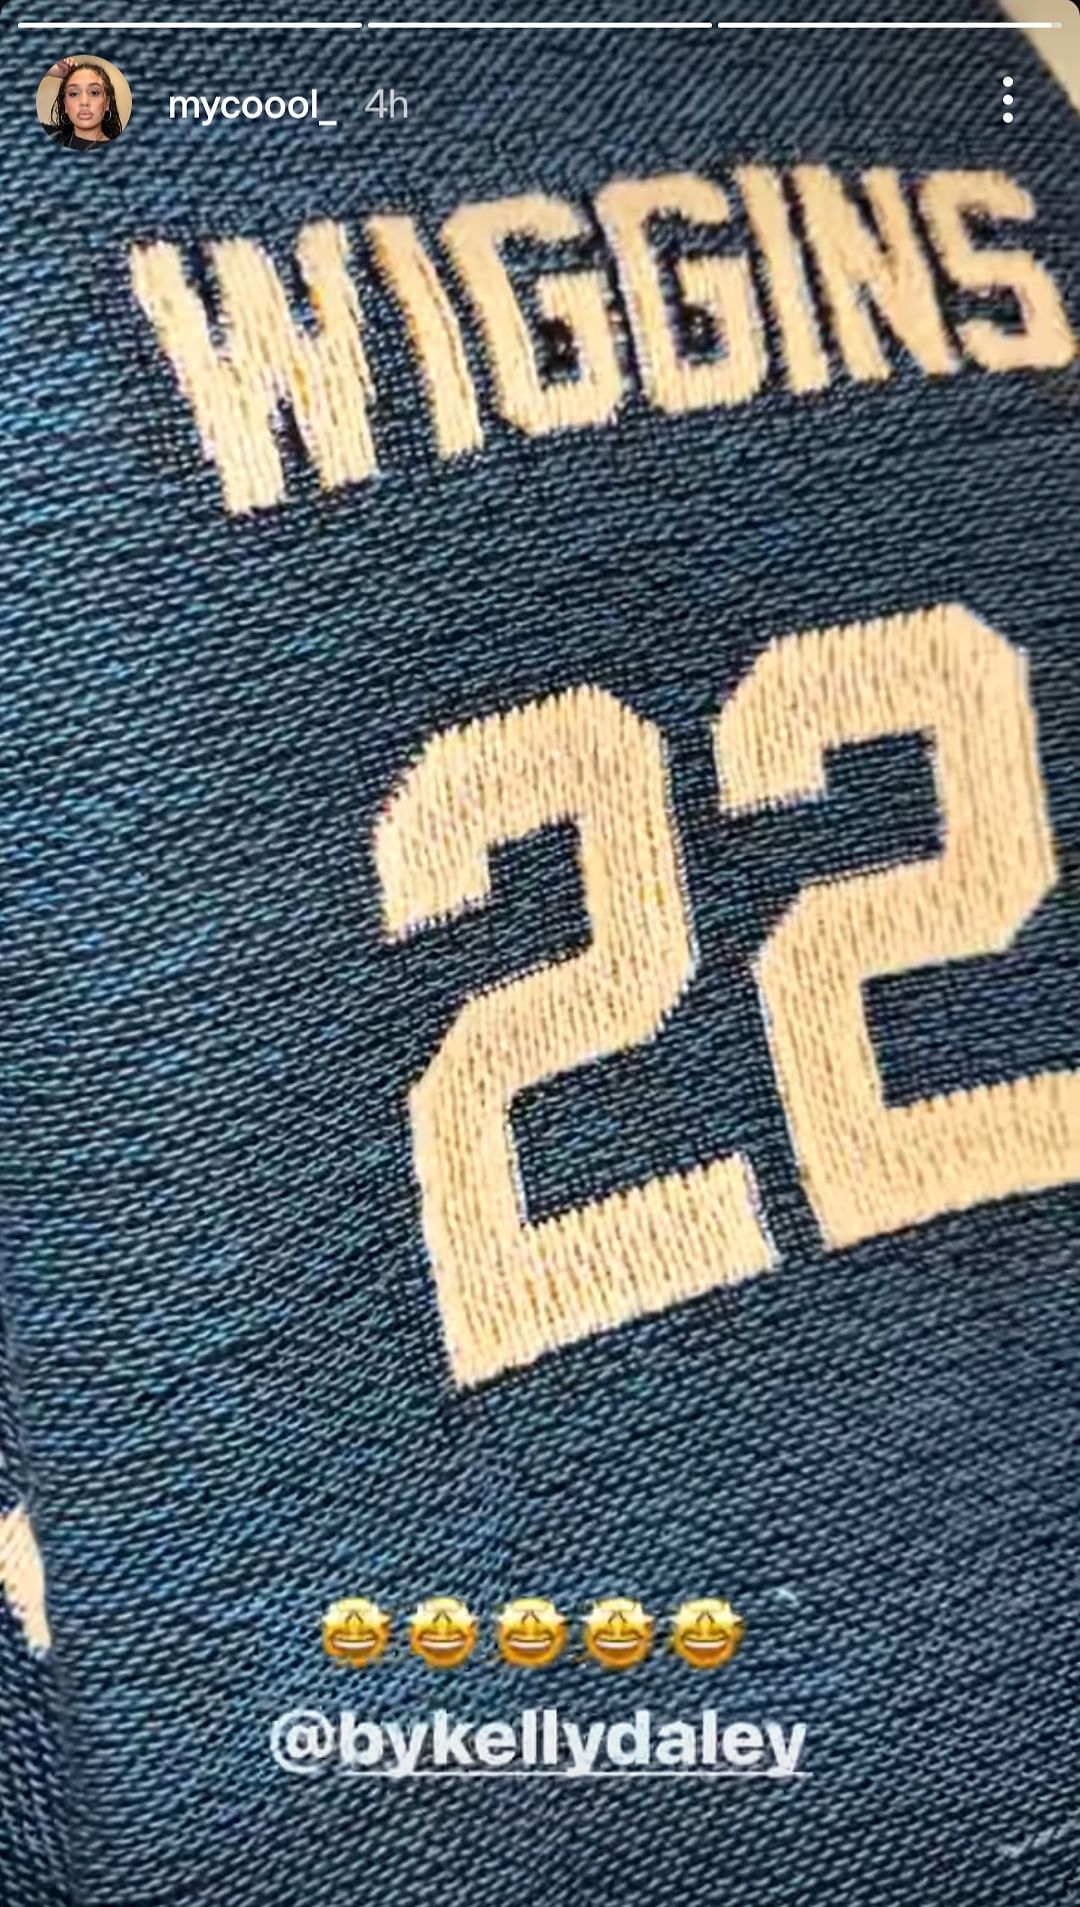 Mychal Johnson&#039;s Instagram story flaunting the custom-made jersey sweater